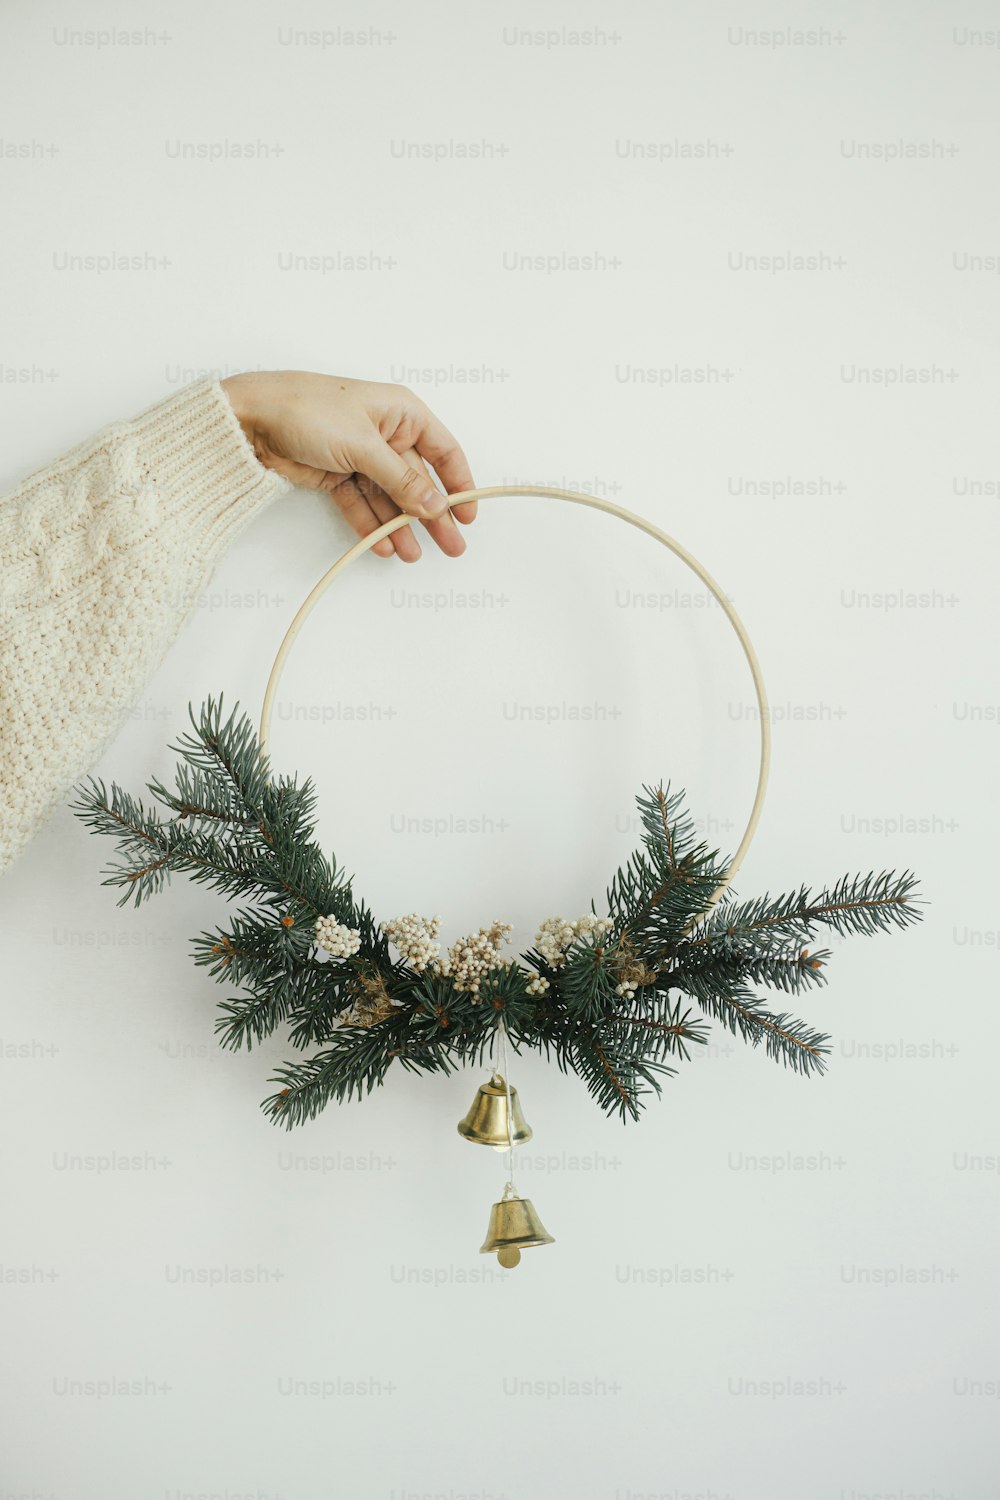 Hand in cozy sweater holding modern christmas wreath on white wall background. Merry Christmas and Happy holidays! Minimalist xmas boho wreath with bells in hand. Atmospheric time